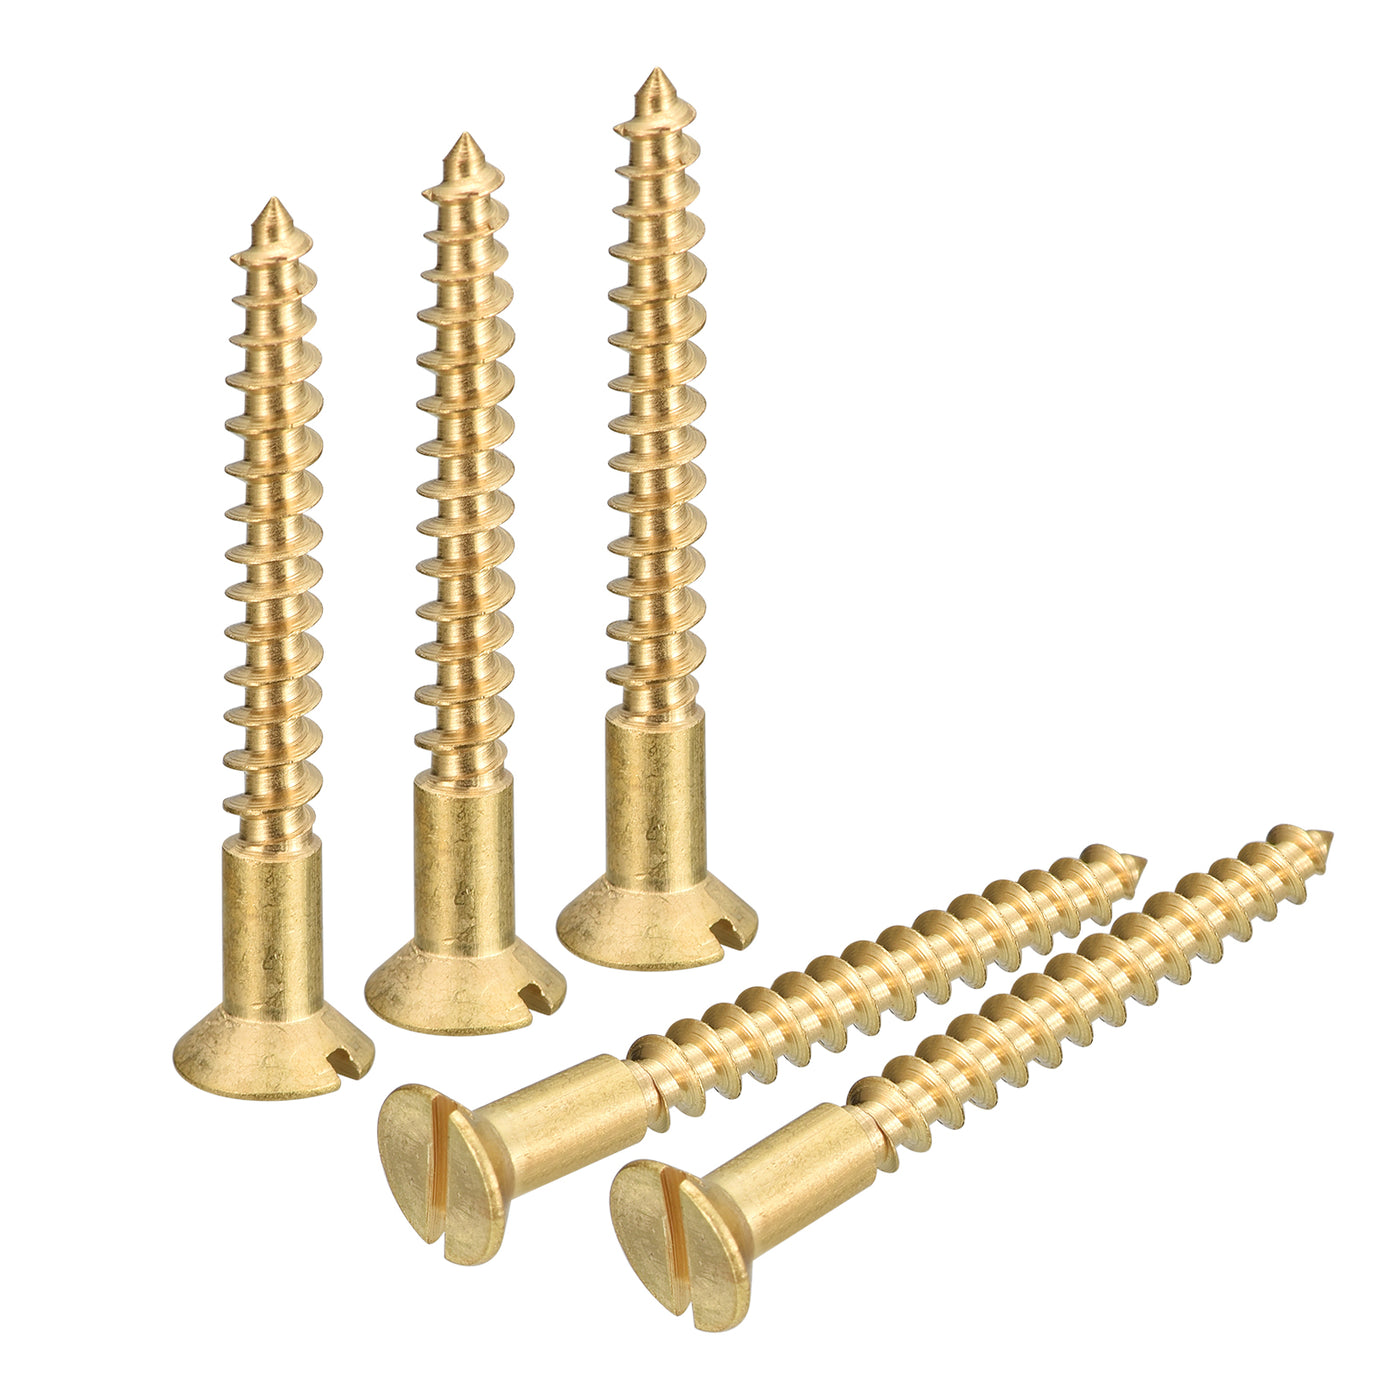 uxcell Uxcell 25Pcs M4 x 35mm Brass Slotted Drive Flat Head Wood Screws Self Tapping Screw